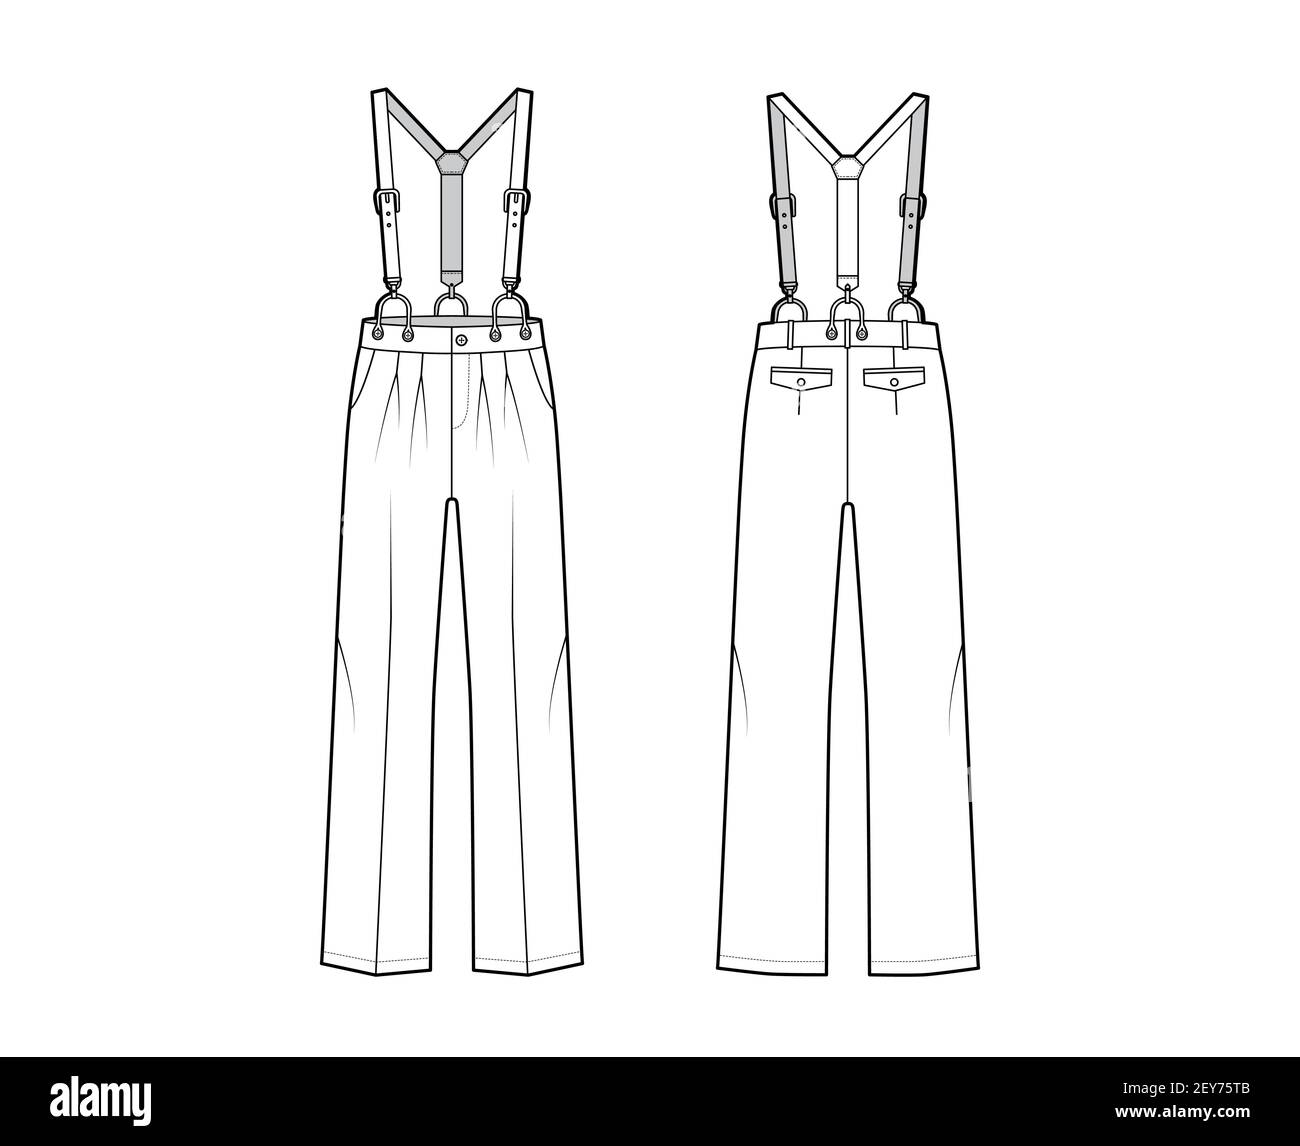 Suspender Pants Dungarees technical fashion illustration with full length, low waist, rise, pockets. Flat apparel garment bottom front back, white color style. Women, men unisex CAD mockup Stock Vector